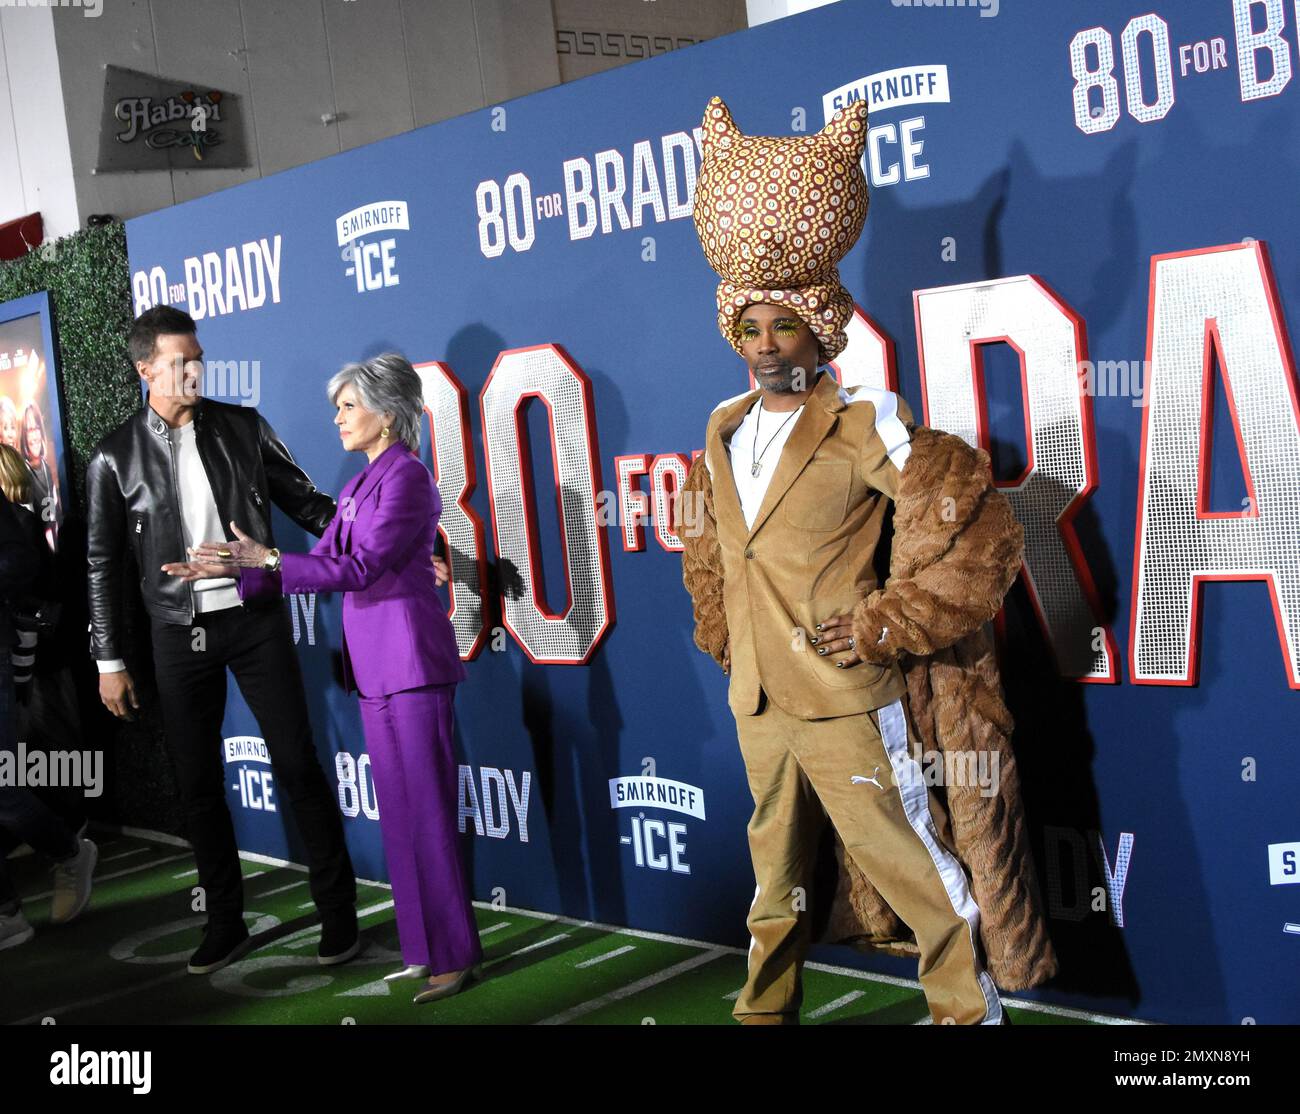 Los Angeles, California, USA 31st January 2023 Tom Brady, Actress Jane Fonda and Actor Billy Porter attend the Los Angeles Premiere Screening of Paramount Pictures' '80 for Brady' at Regency Village Theatre on January 31, 2023 in Los Angeles, California, USA. Photo by Barry King/Alamy Stock Photo Stock Photo